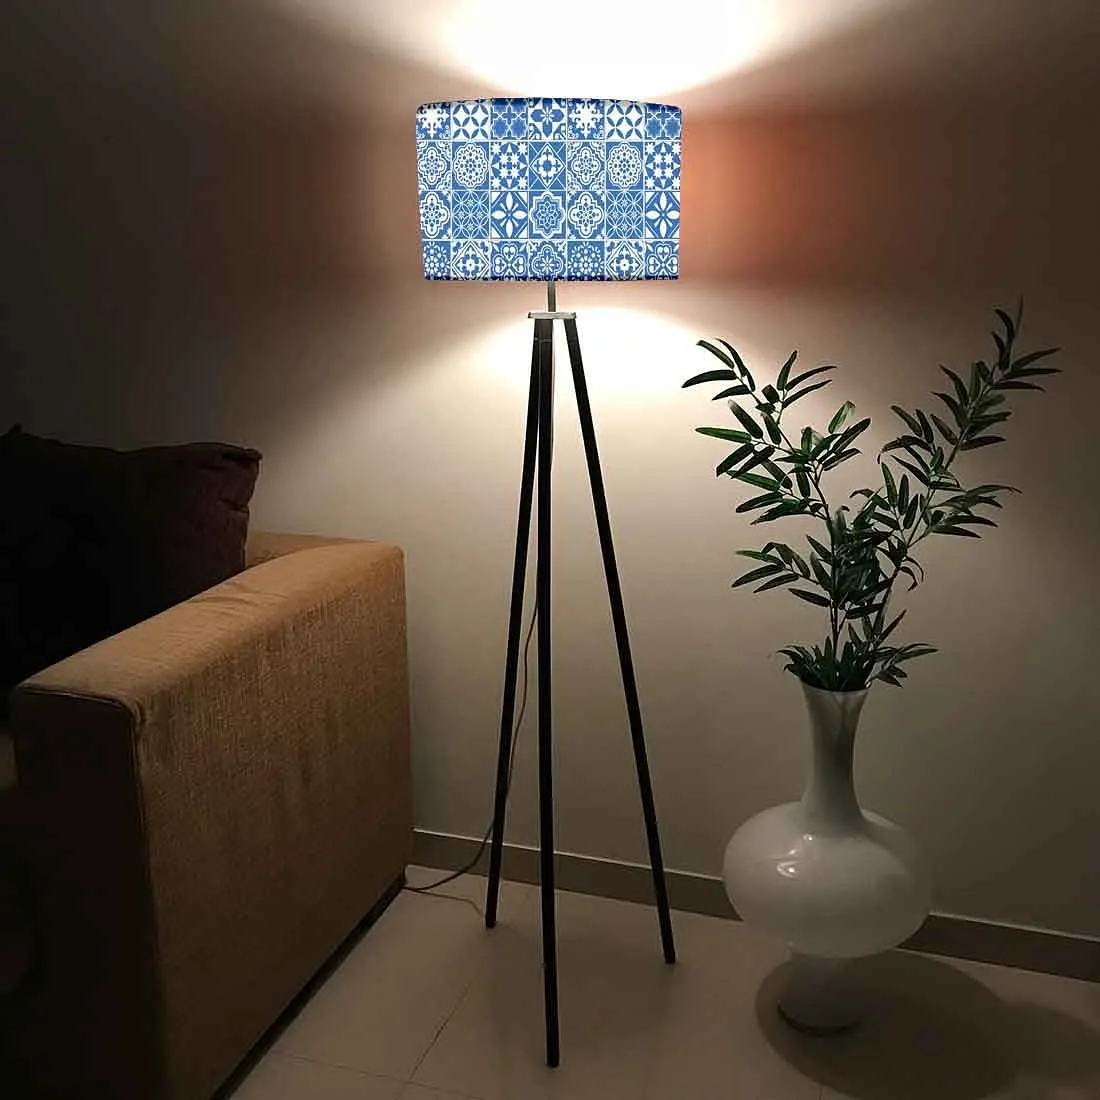 tripod uplighters floor lamps adding a touch of colour and design to your ،me, available online, indoor planter placed besides it, sofa placed in living room